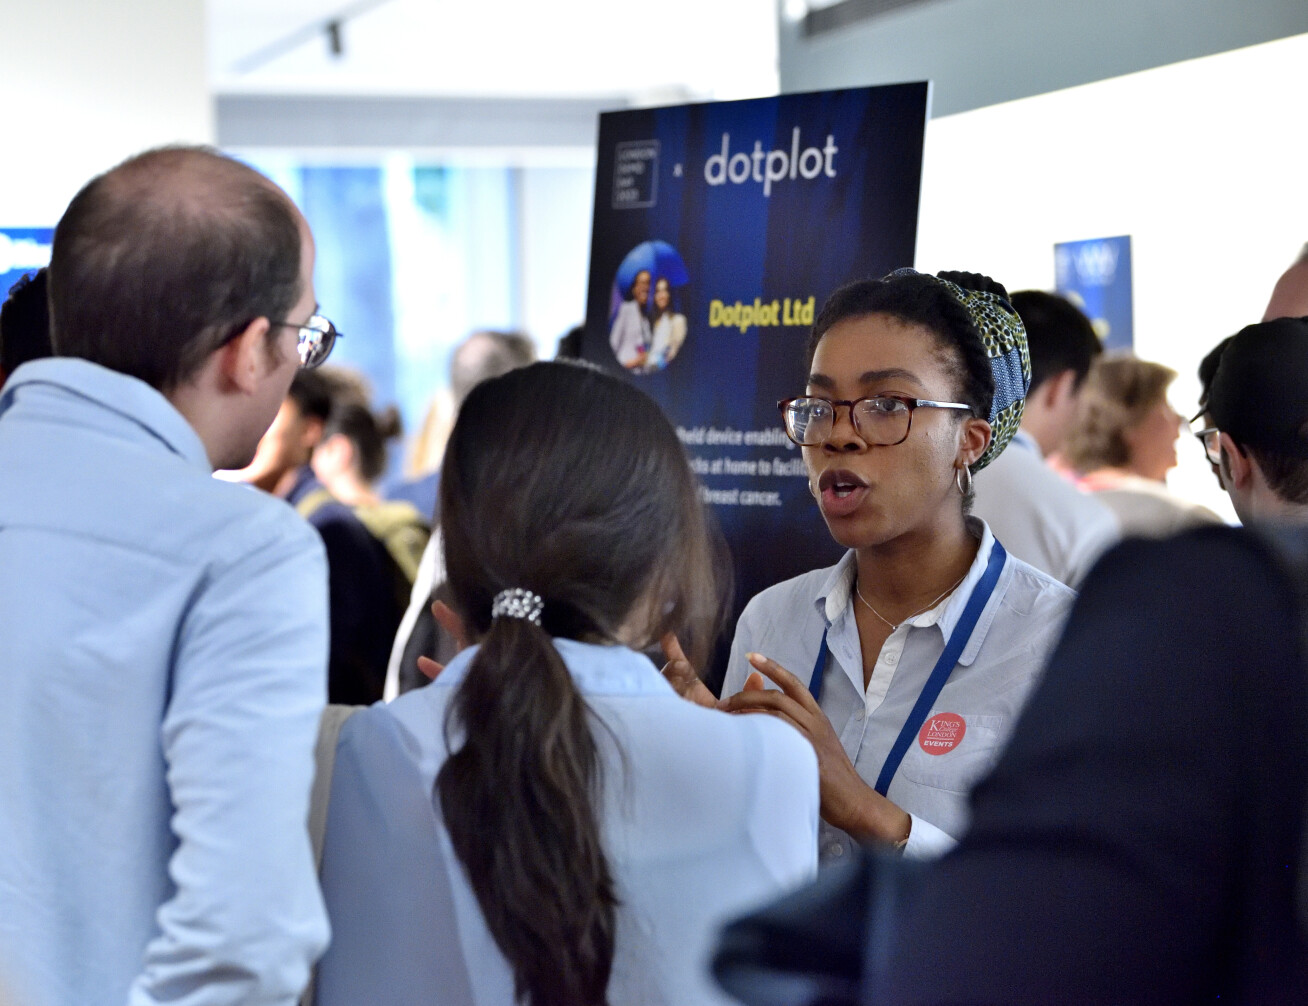 Founder of Dotplot at a networking event